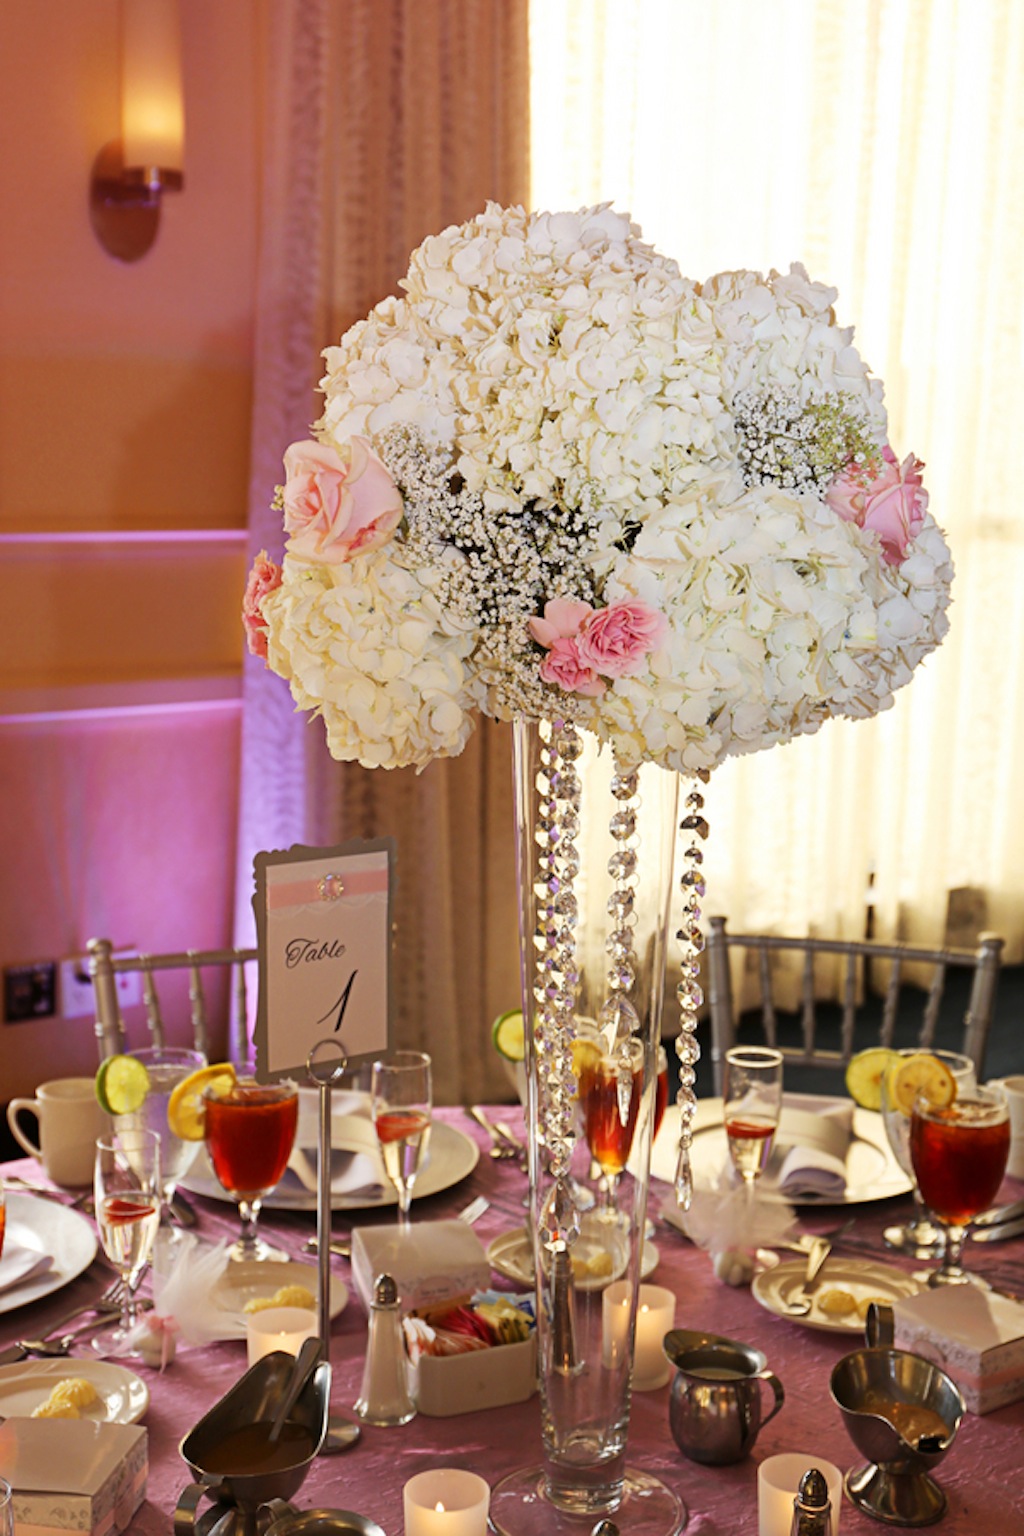 Tall White and Pink Wedding Centerpieces with Crystal Rhinestones | Apple Blossoms Floral Designs